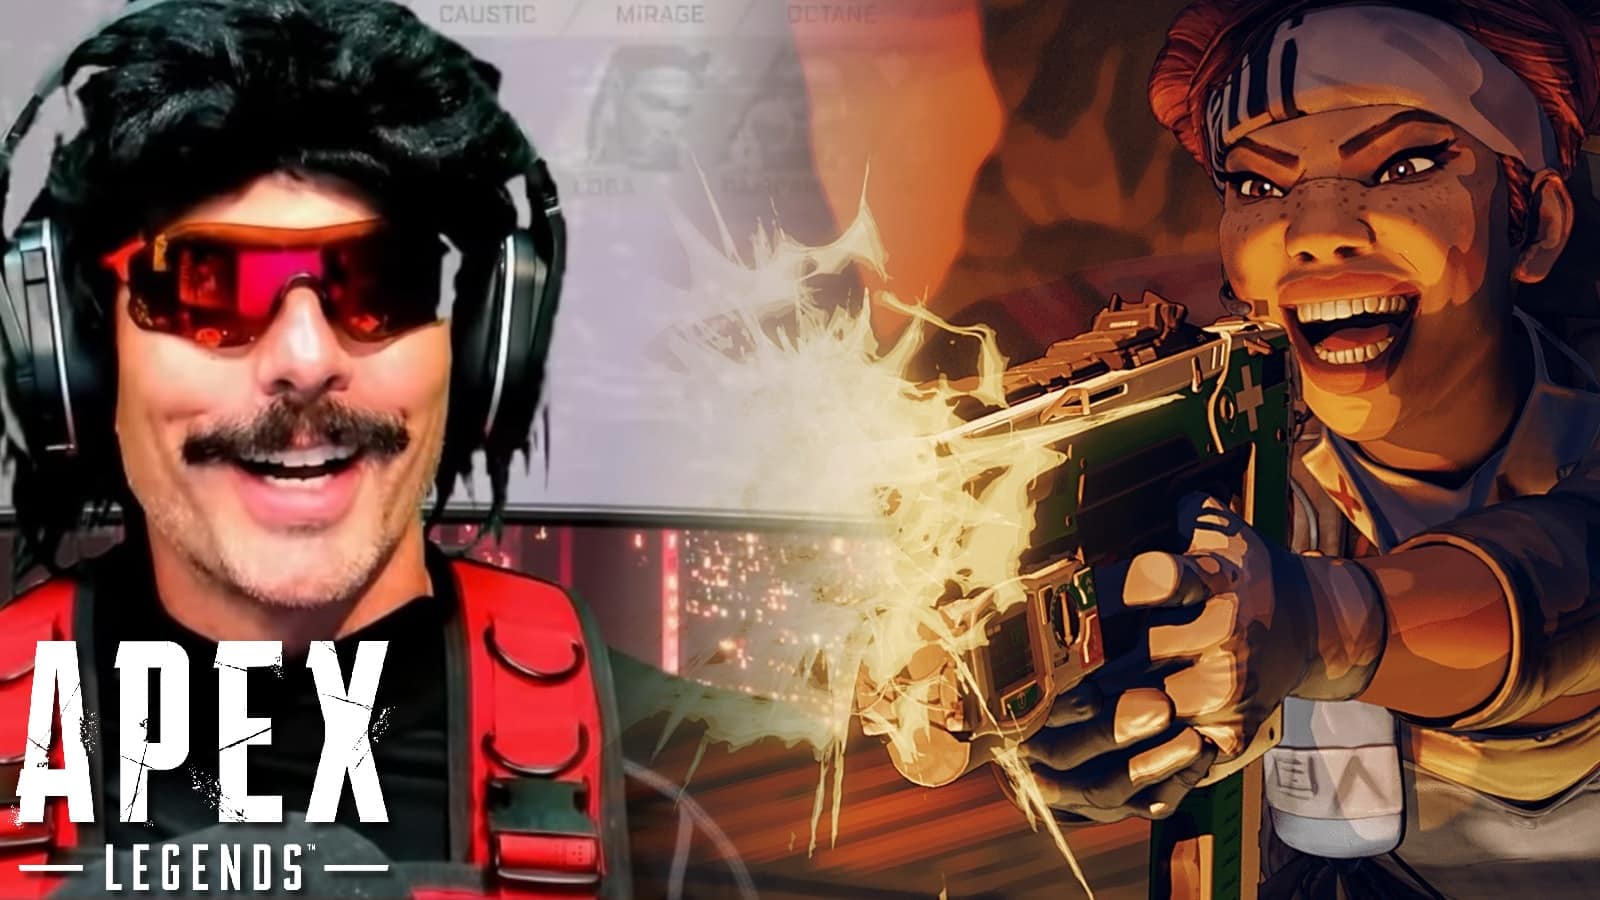 Apex Legends is the most difficult FPS game according to Dr Disrespect